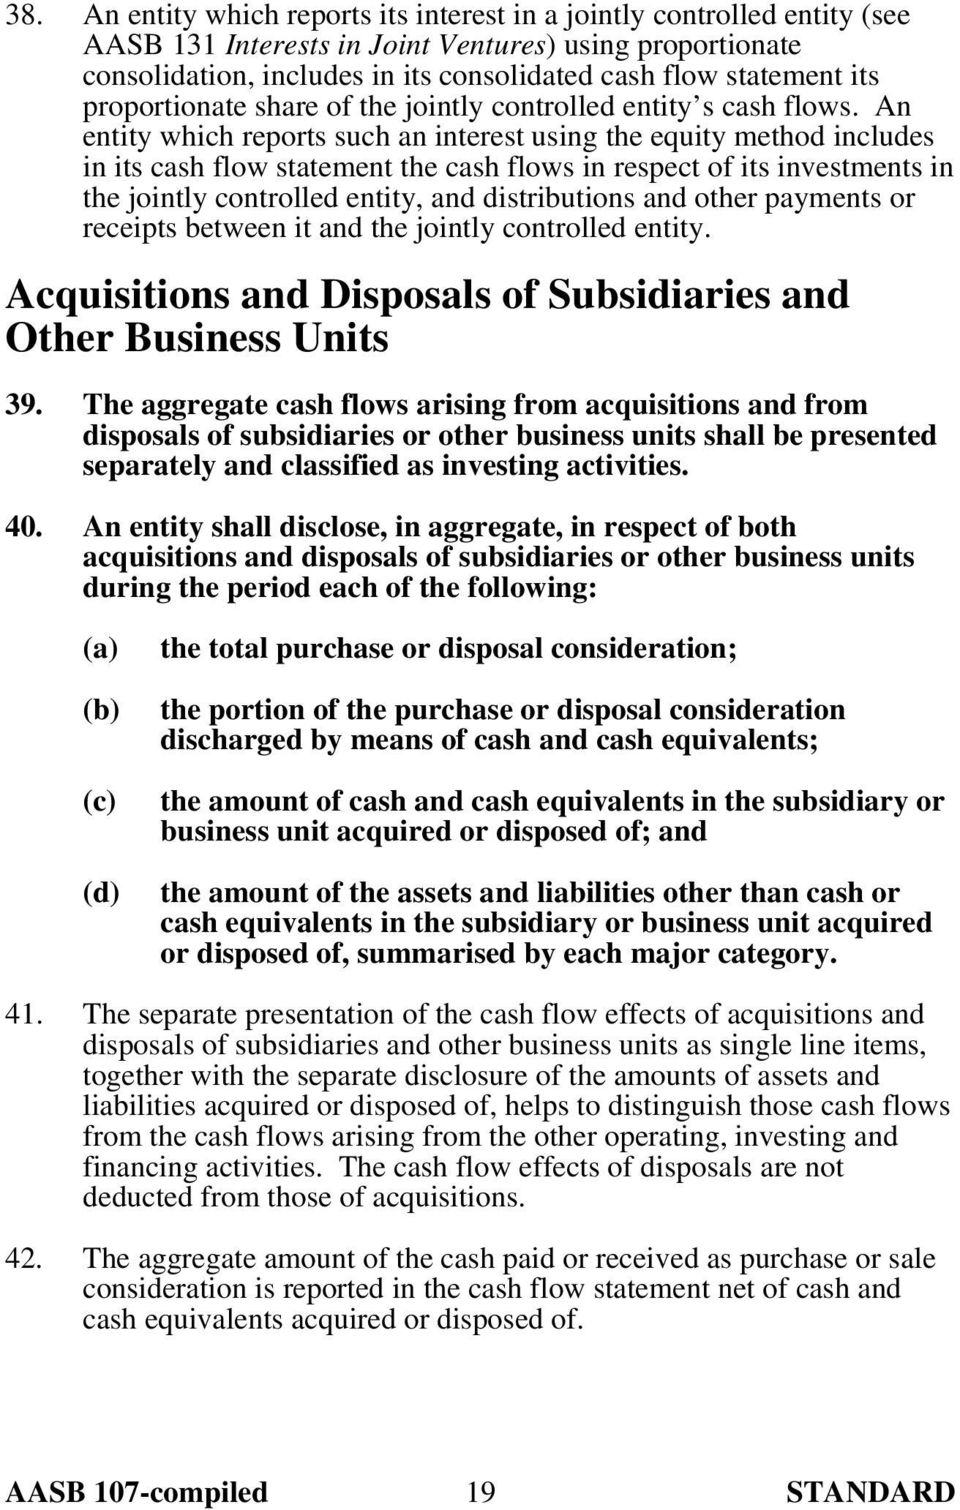 An entity which reports such an interest using the equity method includes in its cash flow statement the cash flows in respect of its investments in the jointly controlled entity, and distributions